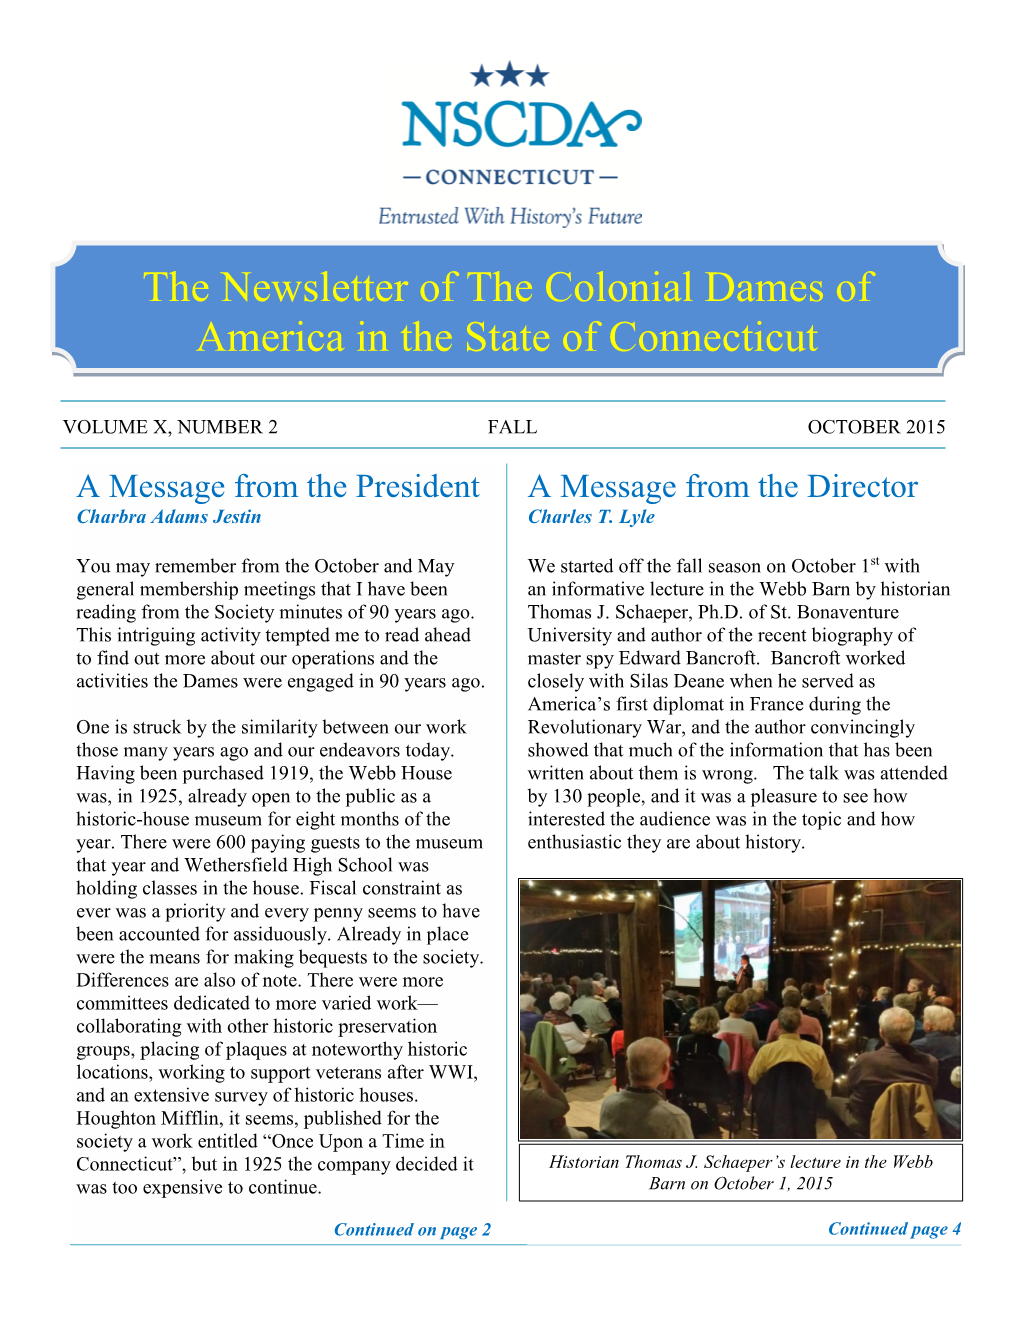 The Newsletter of the Colonial Dames of America in the State of Connecticut